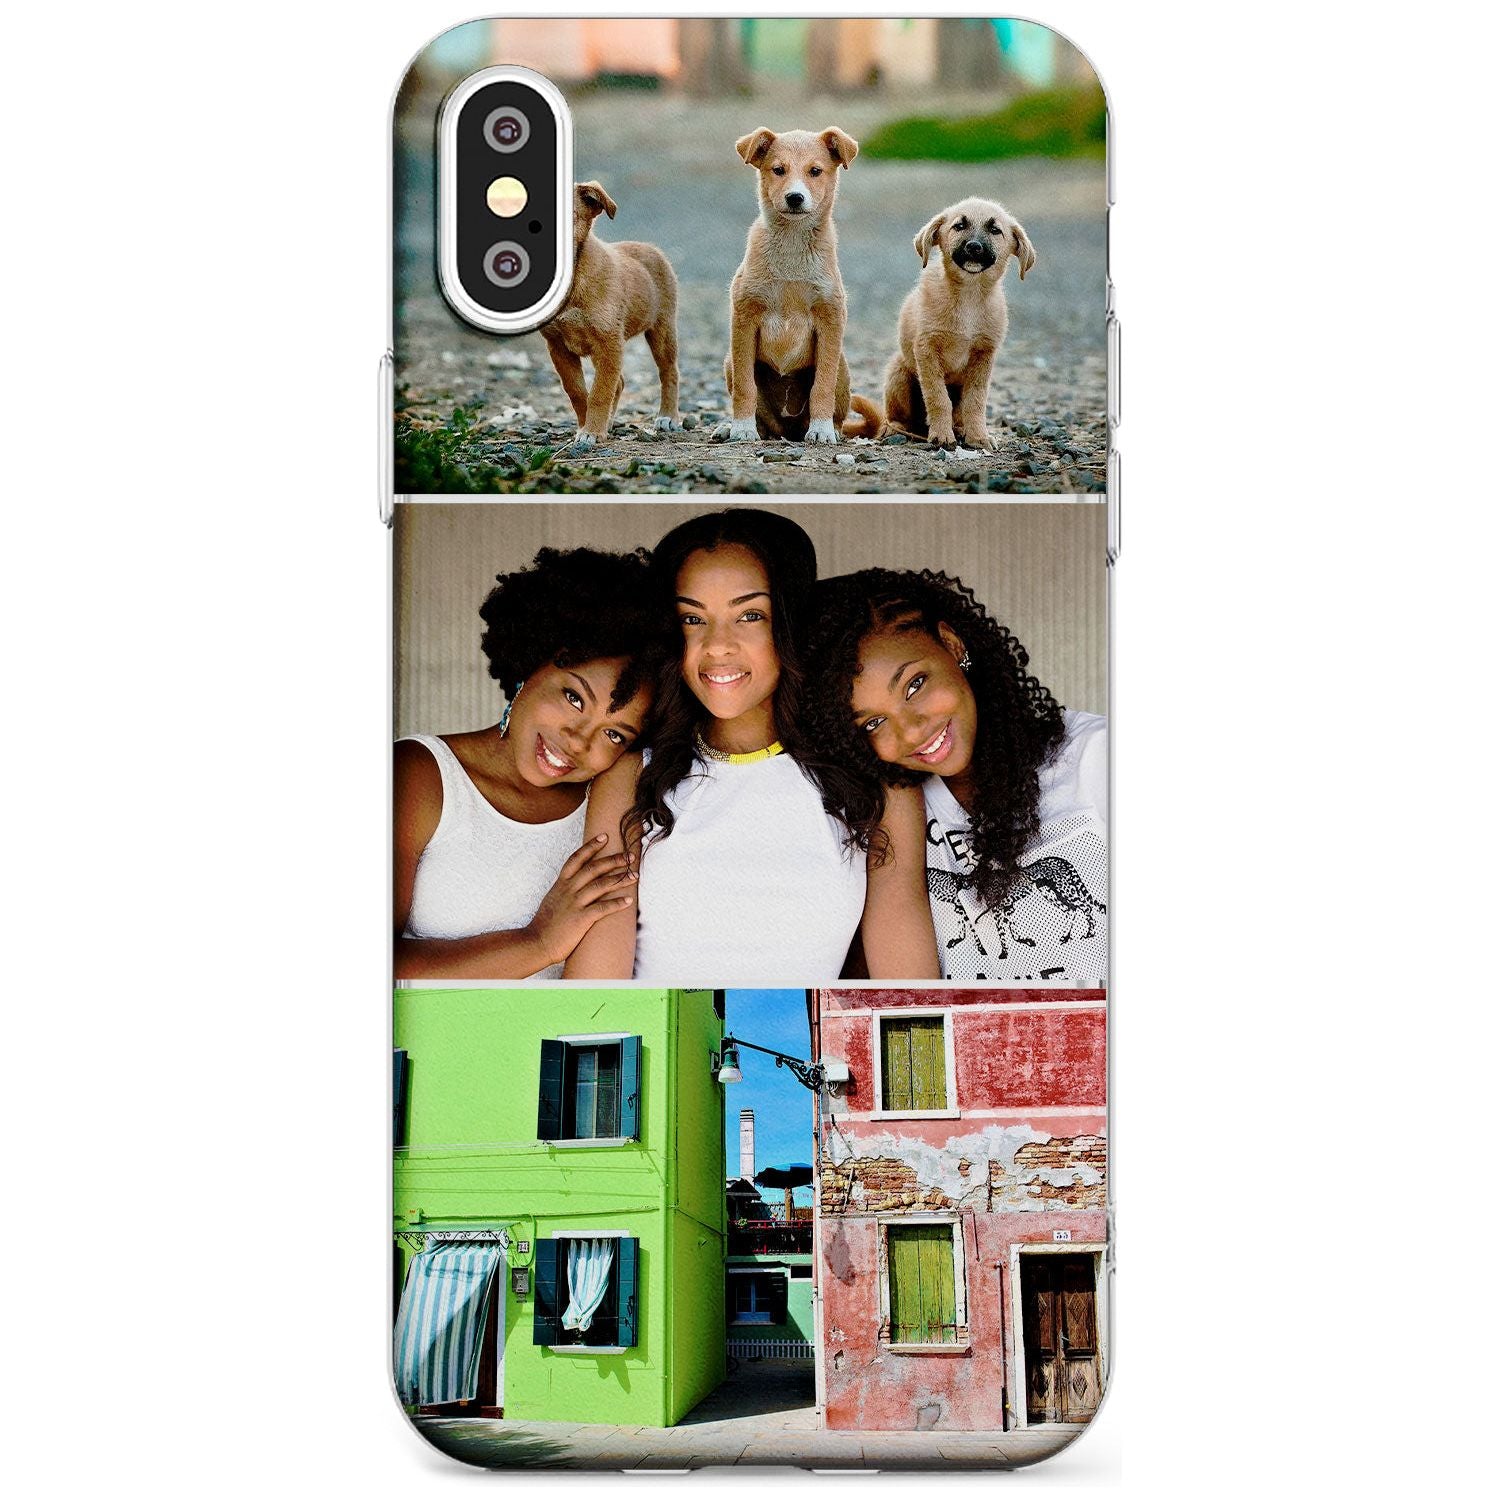 3 Photo Grid  Black Impact Phone Case for iPhone X XS Max XR